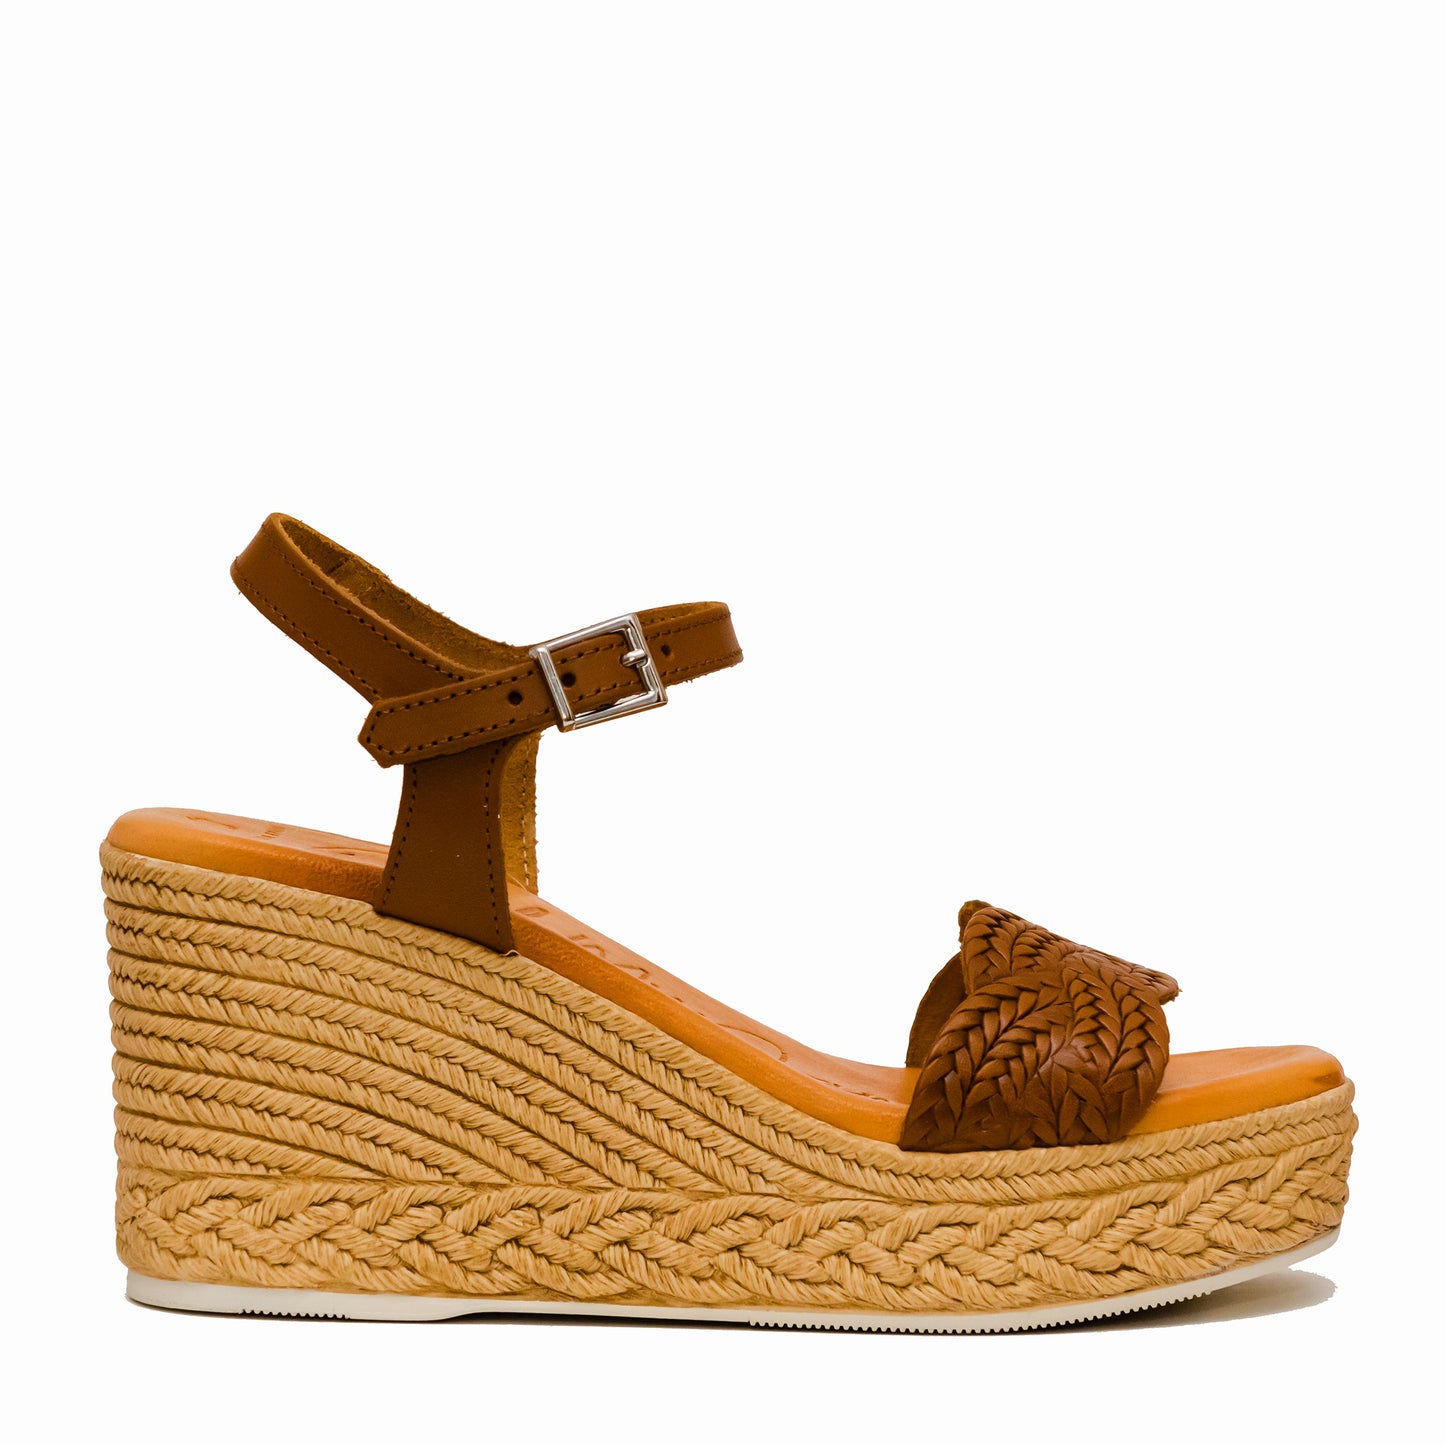 Oh My Sandals 5227 Tan Weave Sandals